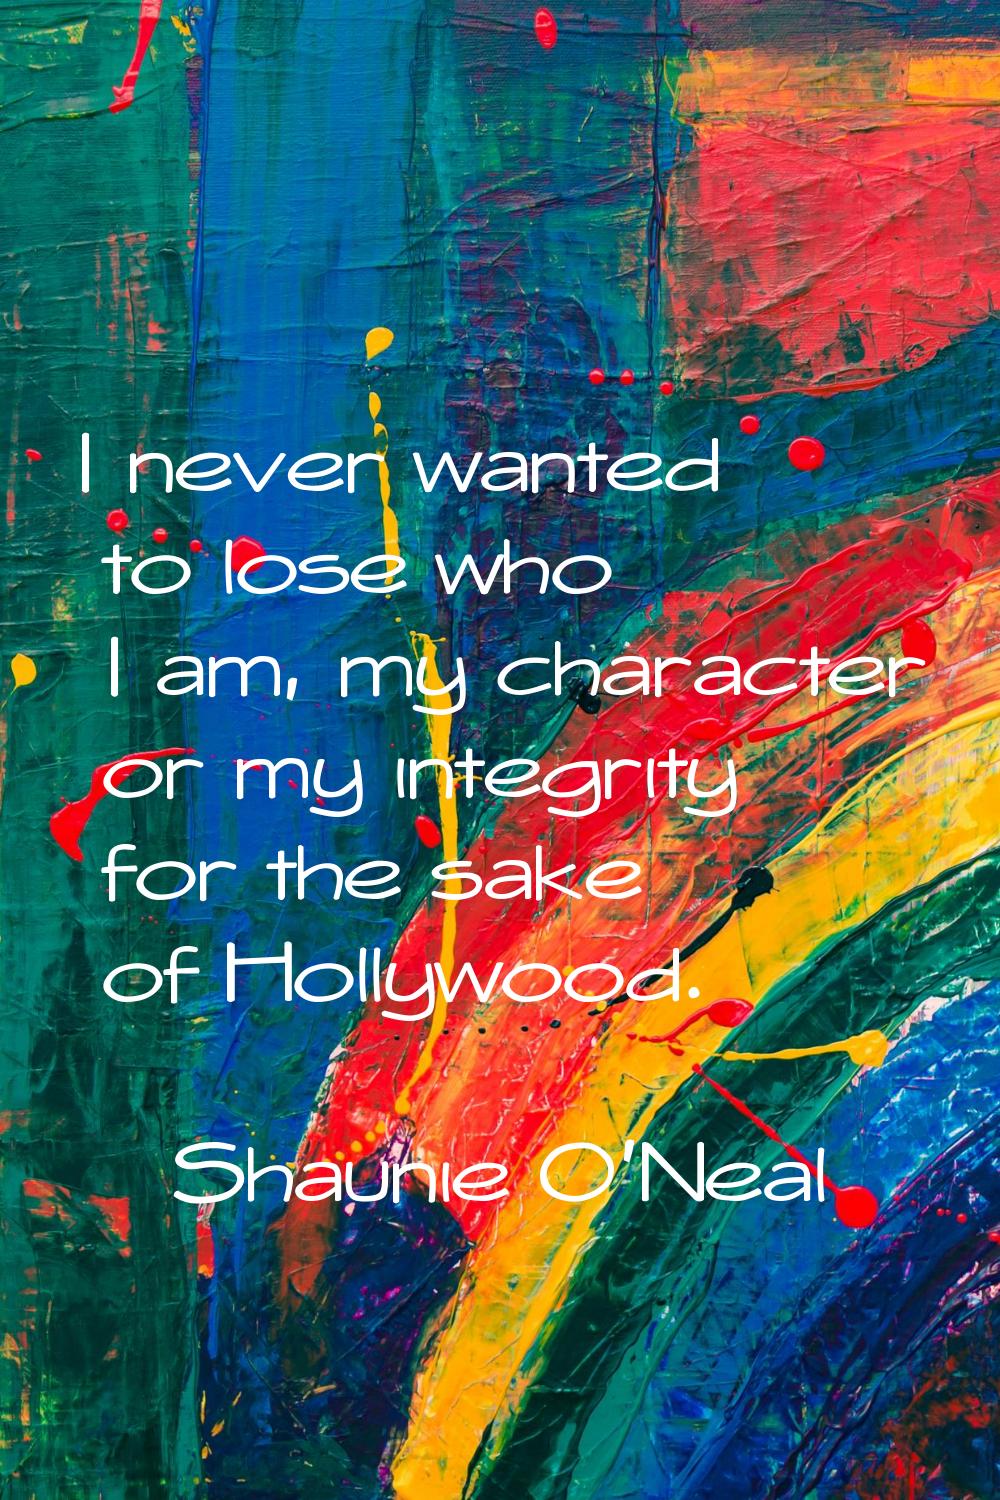 I never wanted to lose who I am, my character or my integrity for the sake of Hollywood.